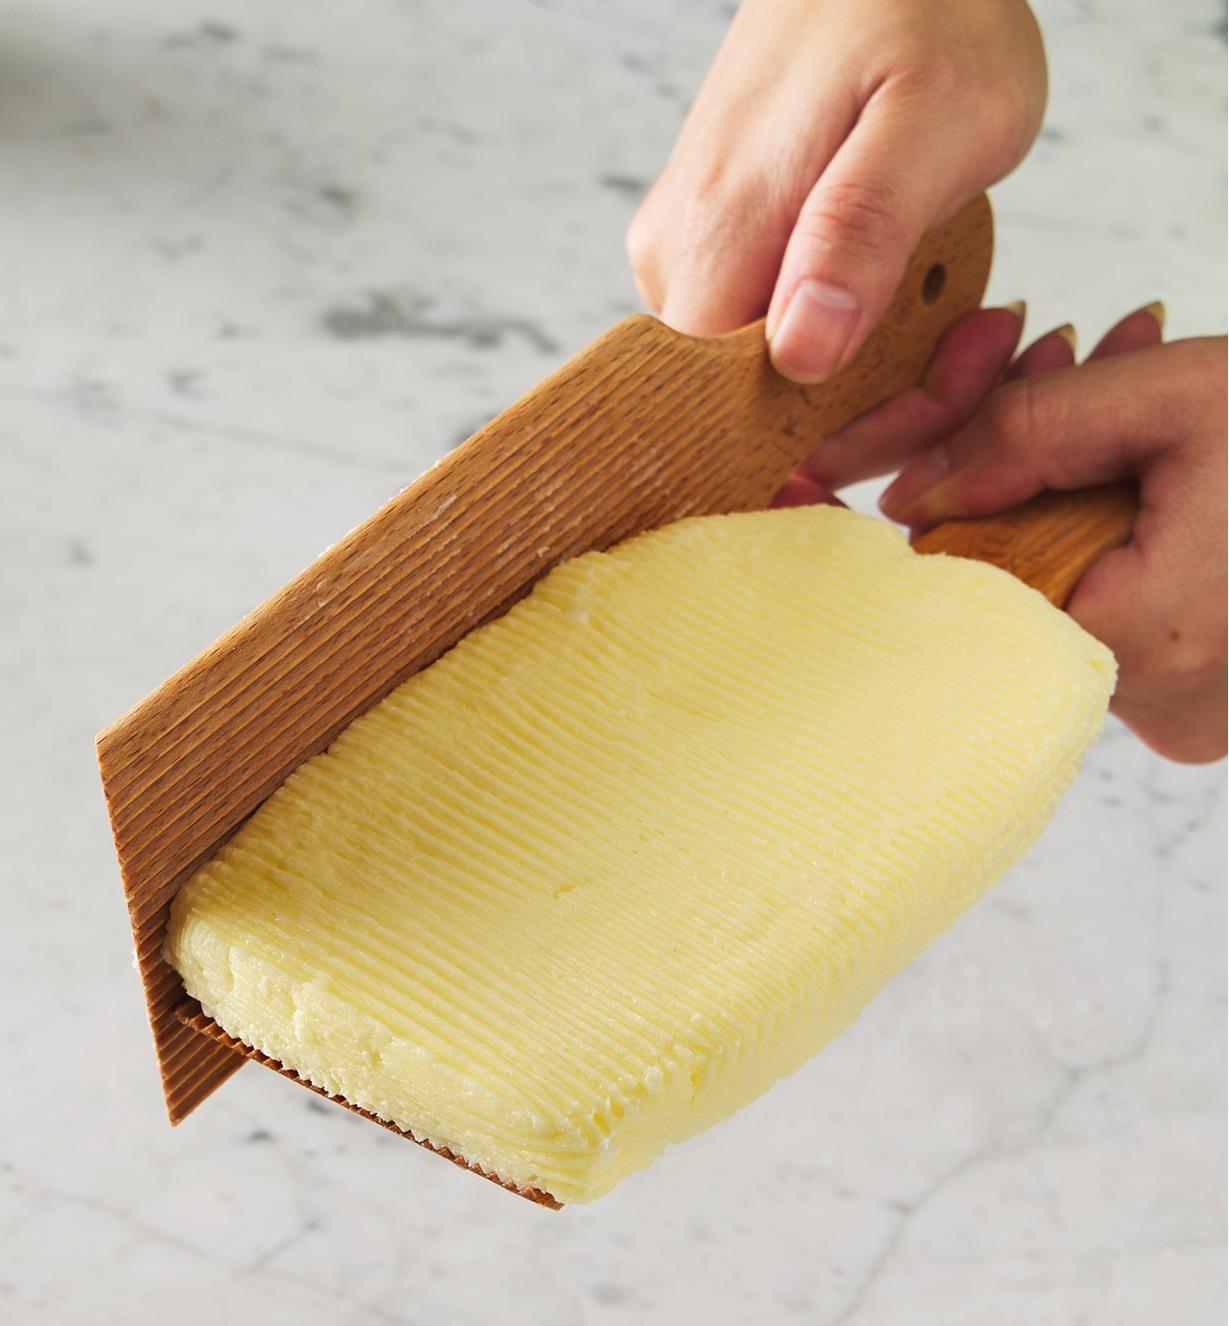 Butter on a paddle being molded into a brick with the other paddle